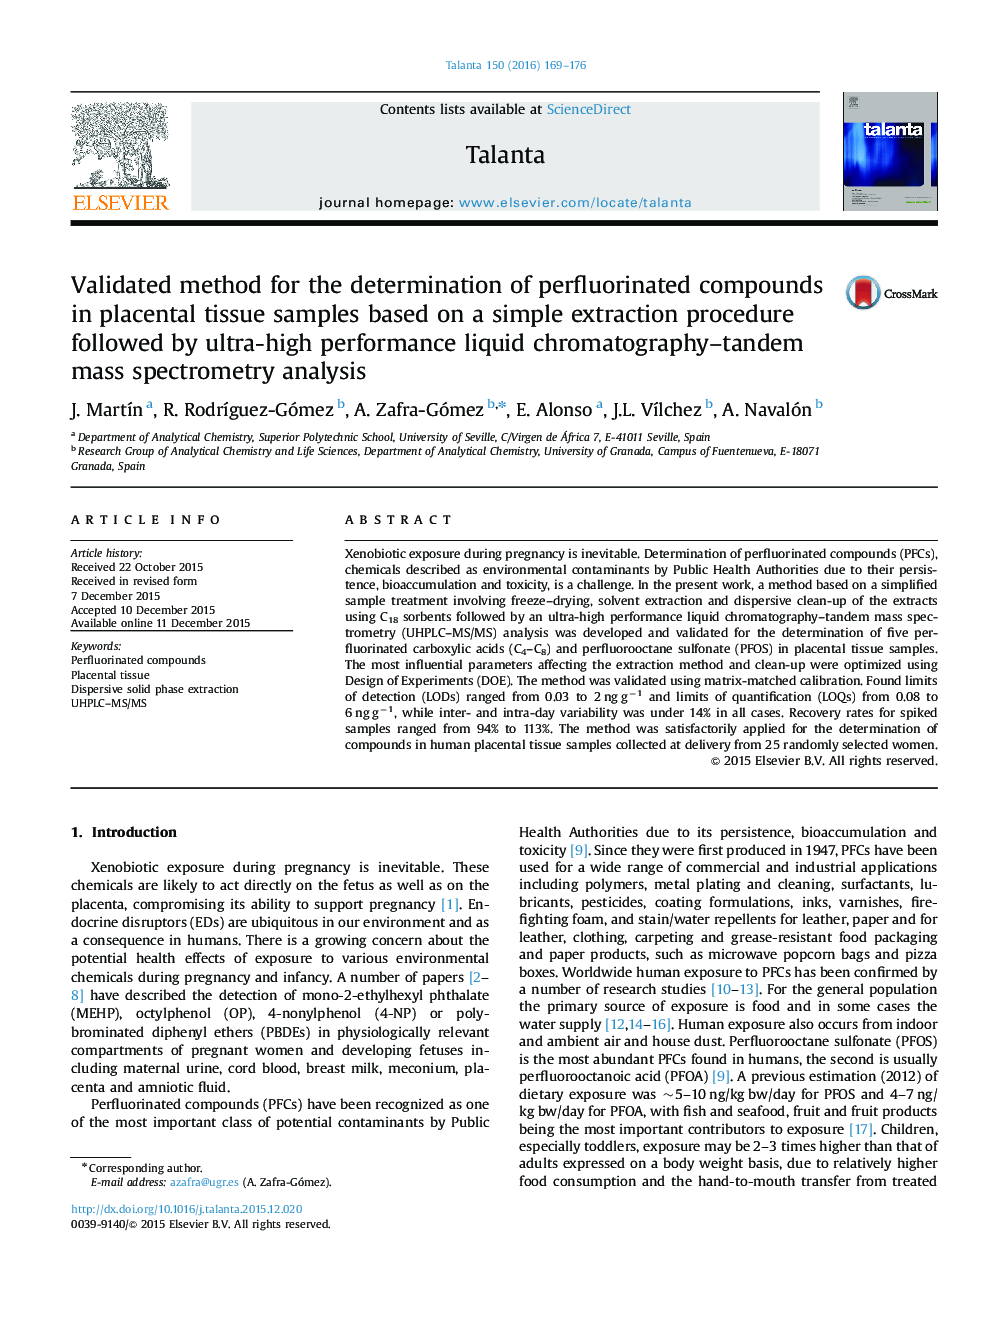 Validated method for the determination of perfluorinated compounds in placental tissue samples based on a simple extraction procedure followed by ultra-high performance liquid chromatography–tandem mass spectrometry analysis